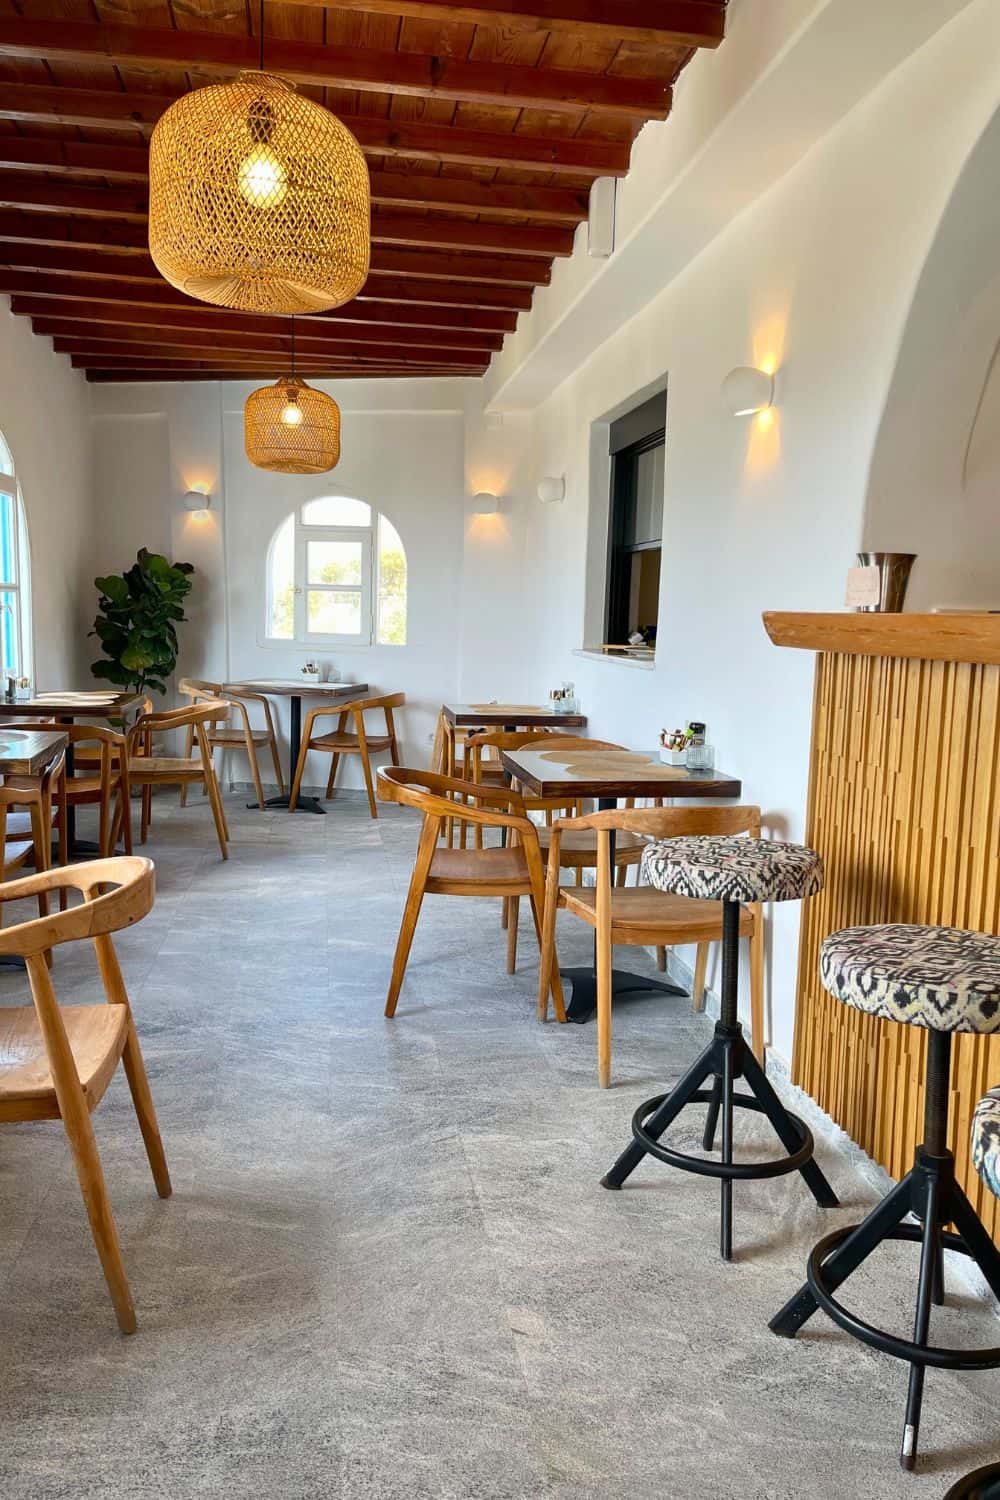 The interior of a cozy restaurant or café in Mykonos with a bright and airy feel. Wooden tables and chairs are neatly arranged on a grey tiled floor. The room is lit by natural light from windows and complemented by stylish hanging pendant lights with wicker coverings. The wooden ceiling beams add warmth to the space, creating a welcoming environment for diners